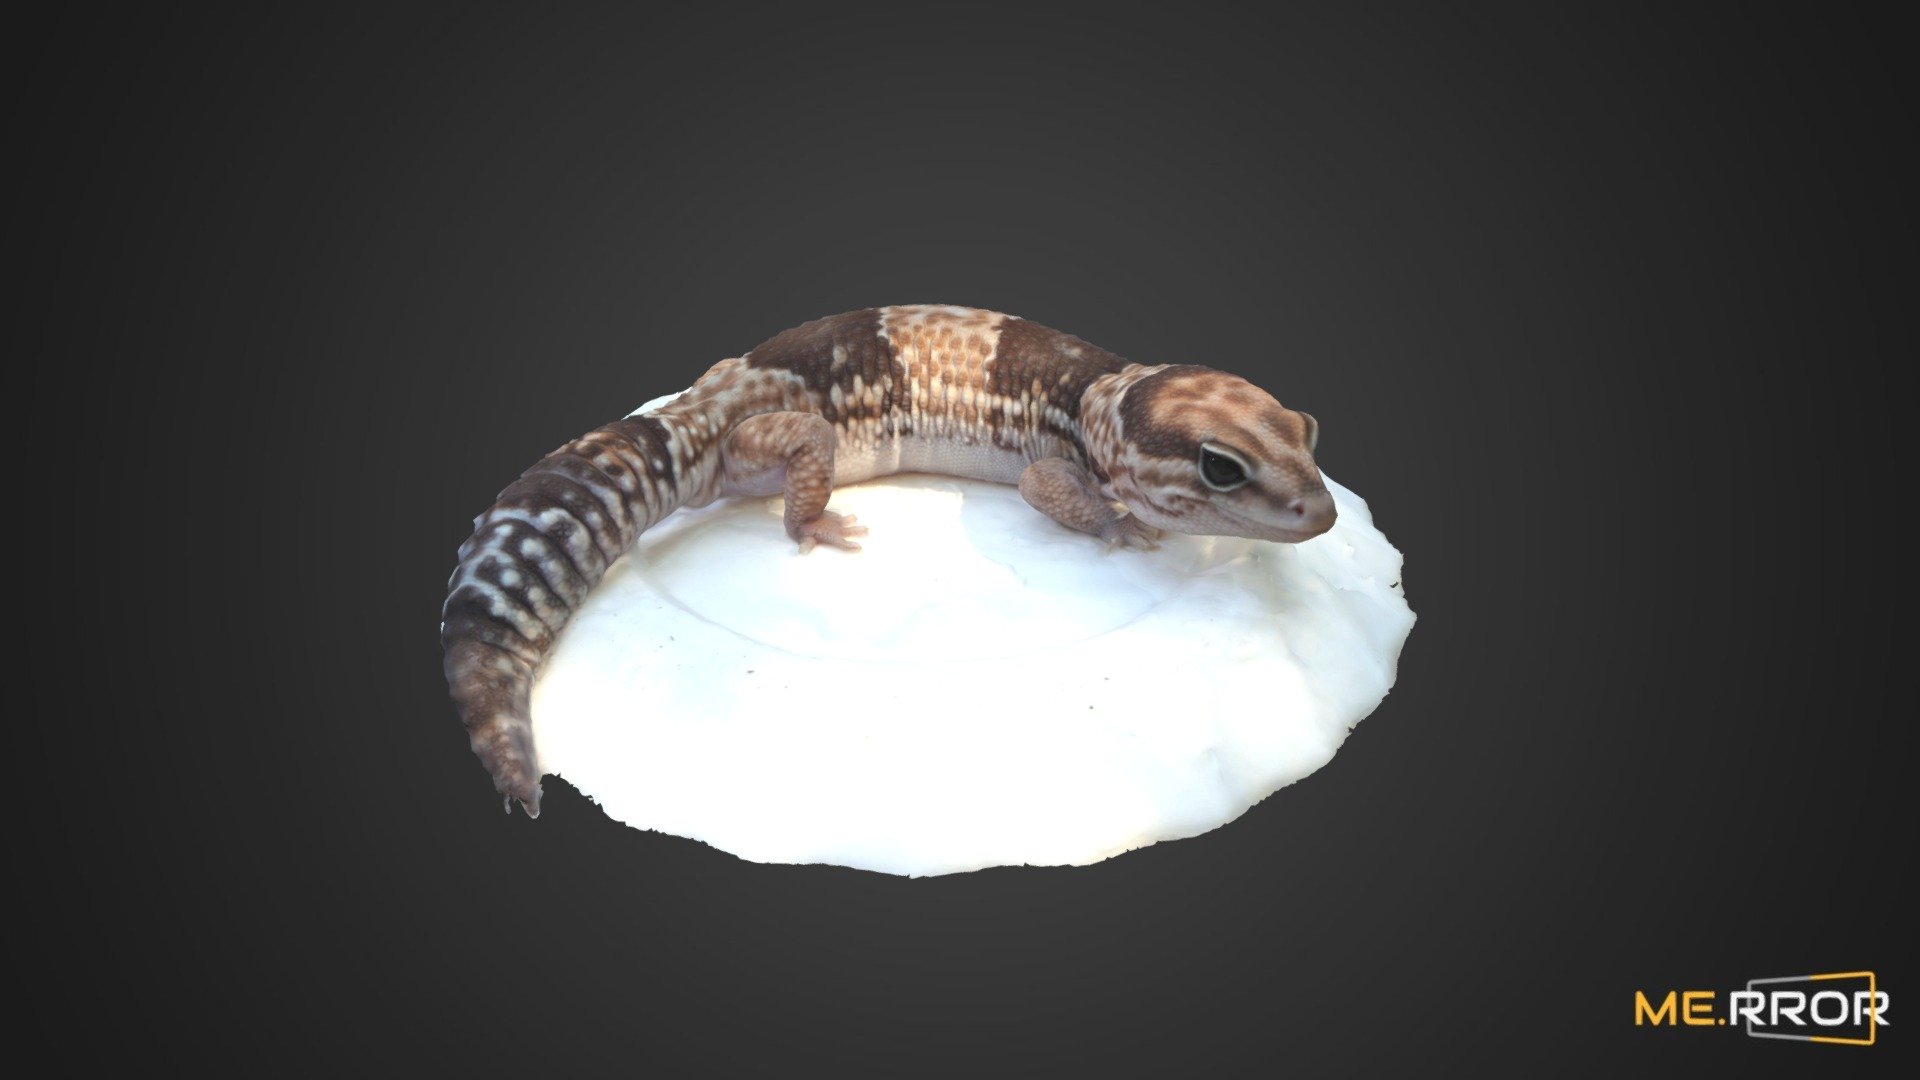 MERROR is a 3D Content PLATFORM which introduces various Asian assets to the 3D world


3DScanning #Photogrametry #ME.RROR - Lizard - Buy Royalty Free 3D model by ME.RROR (@merror) 3d model